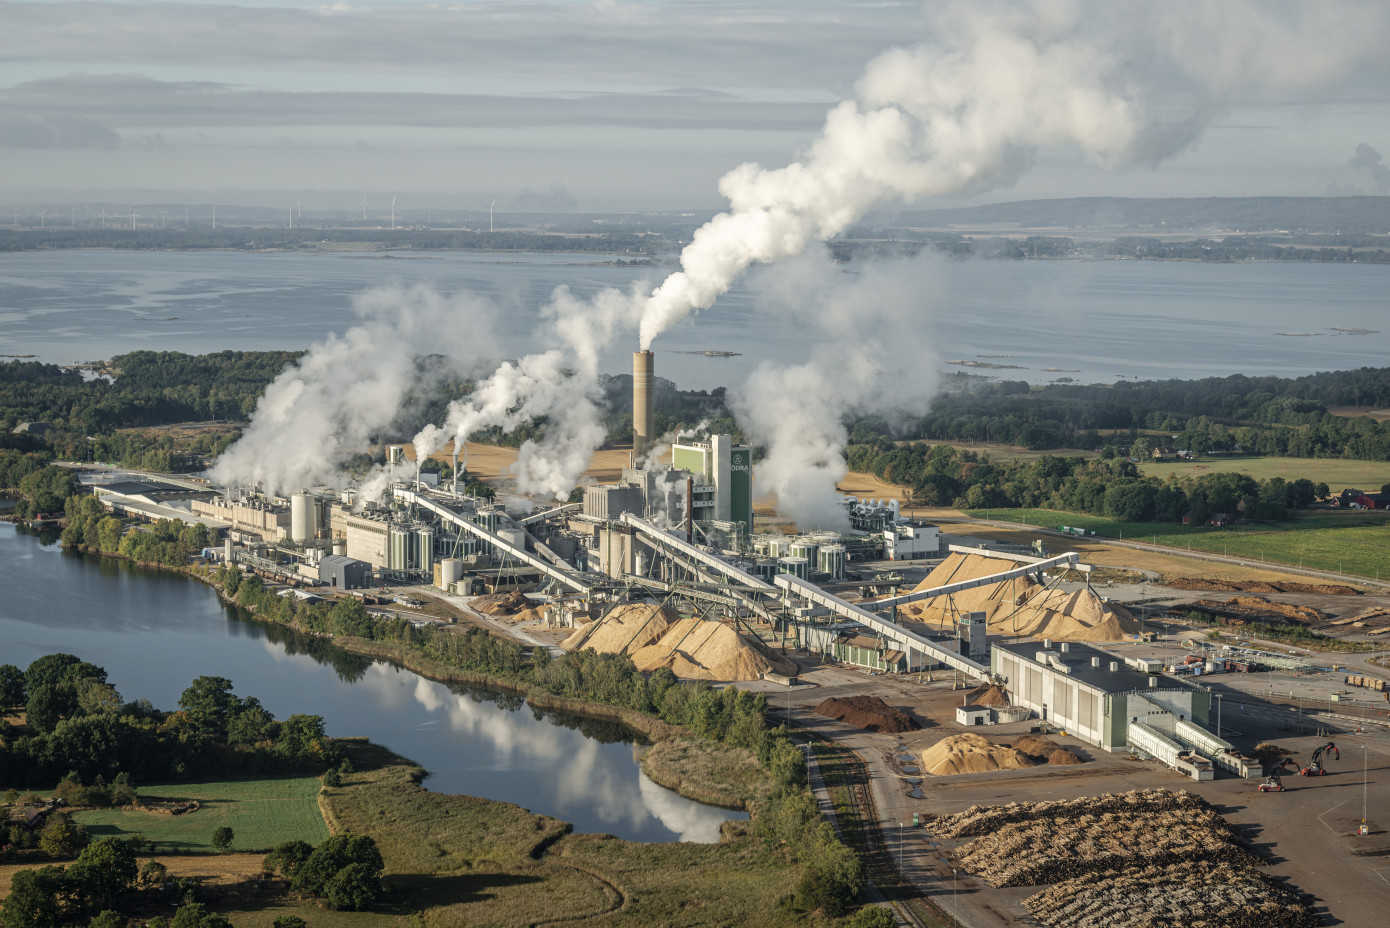 Södra to invest in green electricity generation at Mörrum pulp mill in Sweden